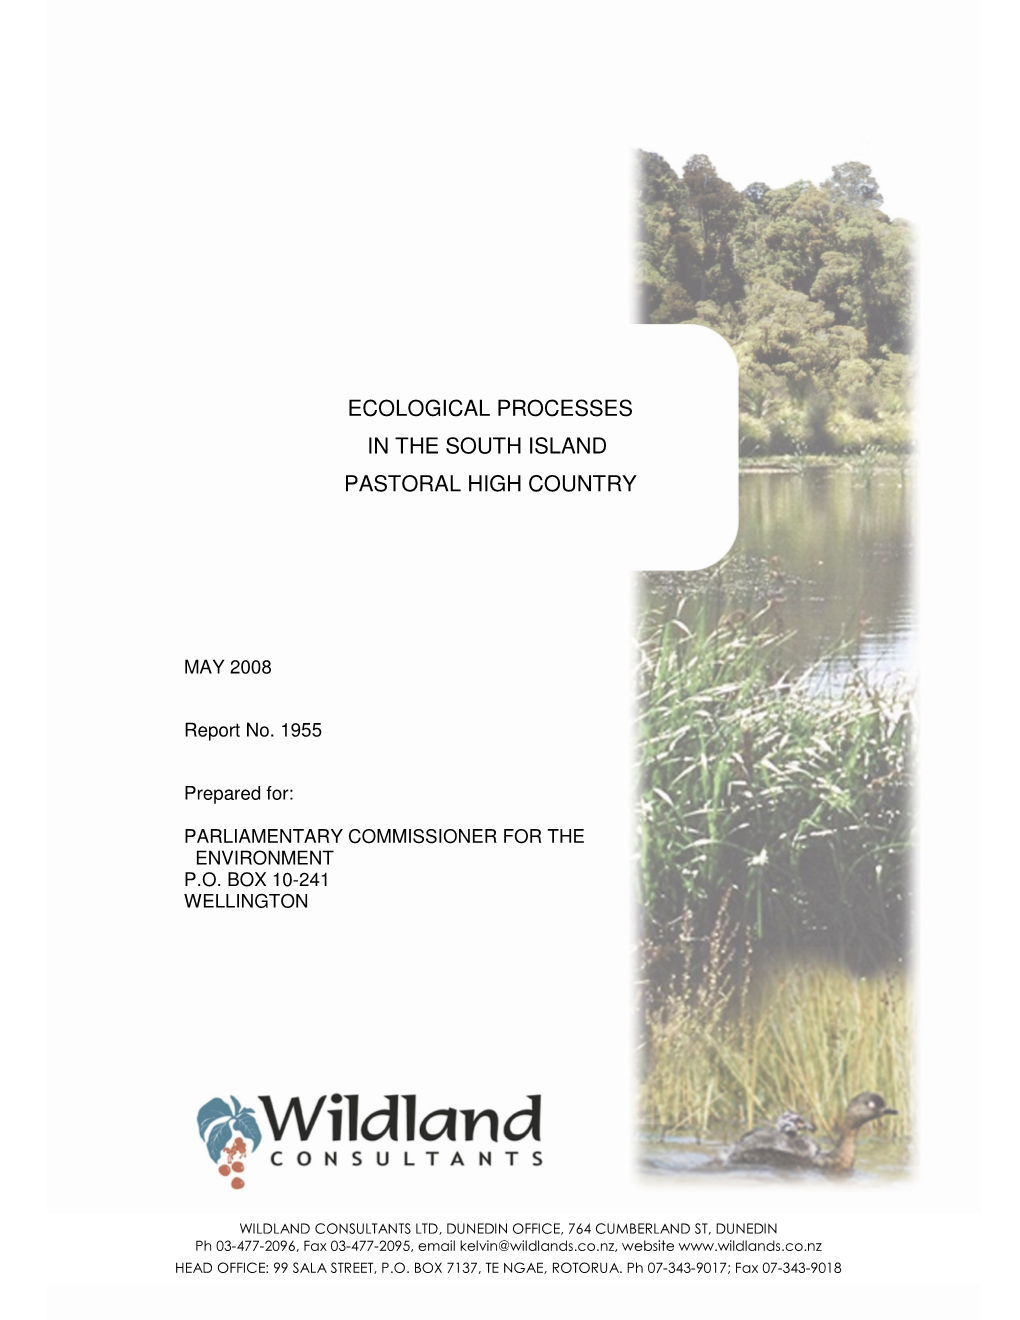 Ecological Processes in the South Island Pastoral High Country